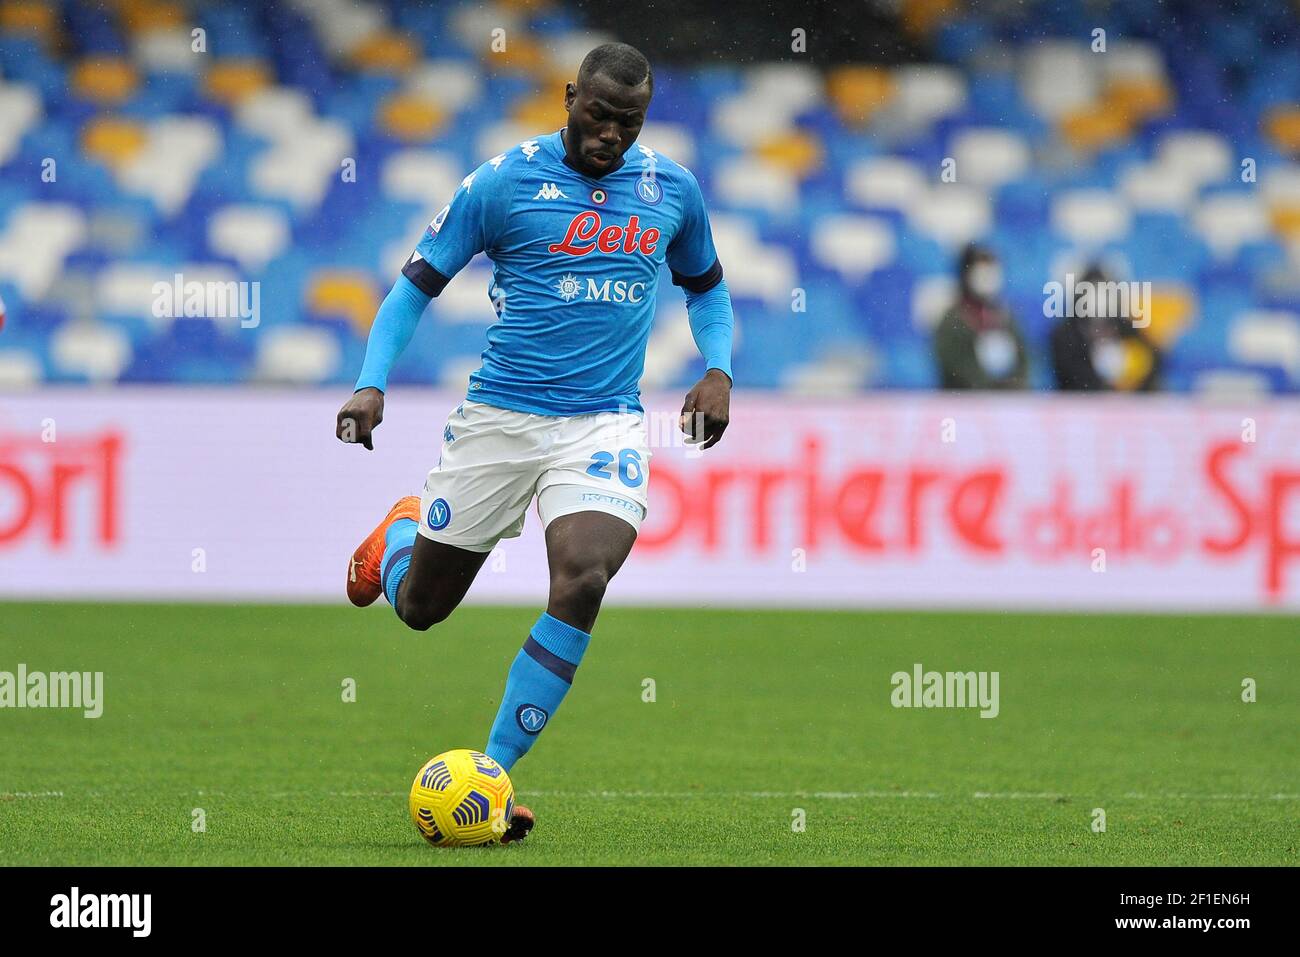 Kalidou Koulibaly player of Napoli, during the match of the Italian football league Serie A between Napoli vs Fiorentina final result 5-0, match playe Stock Photo